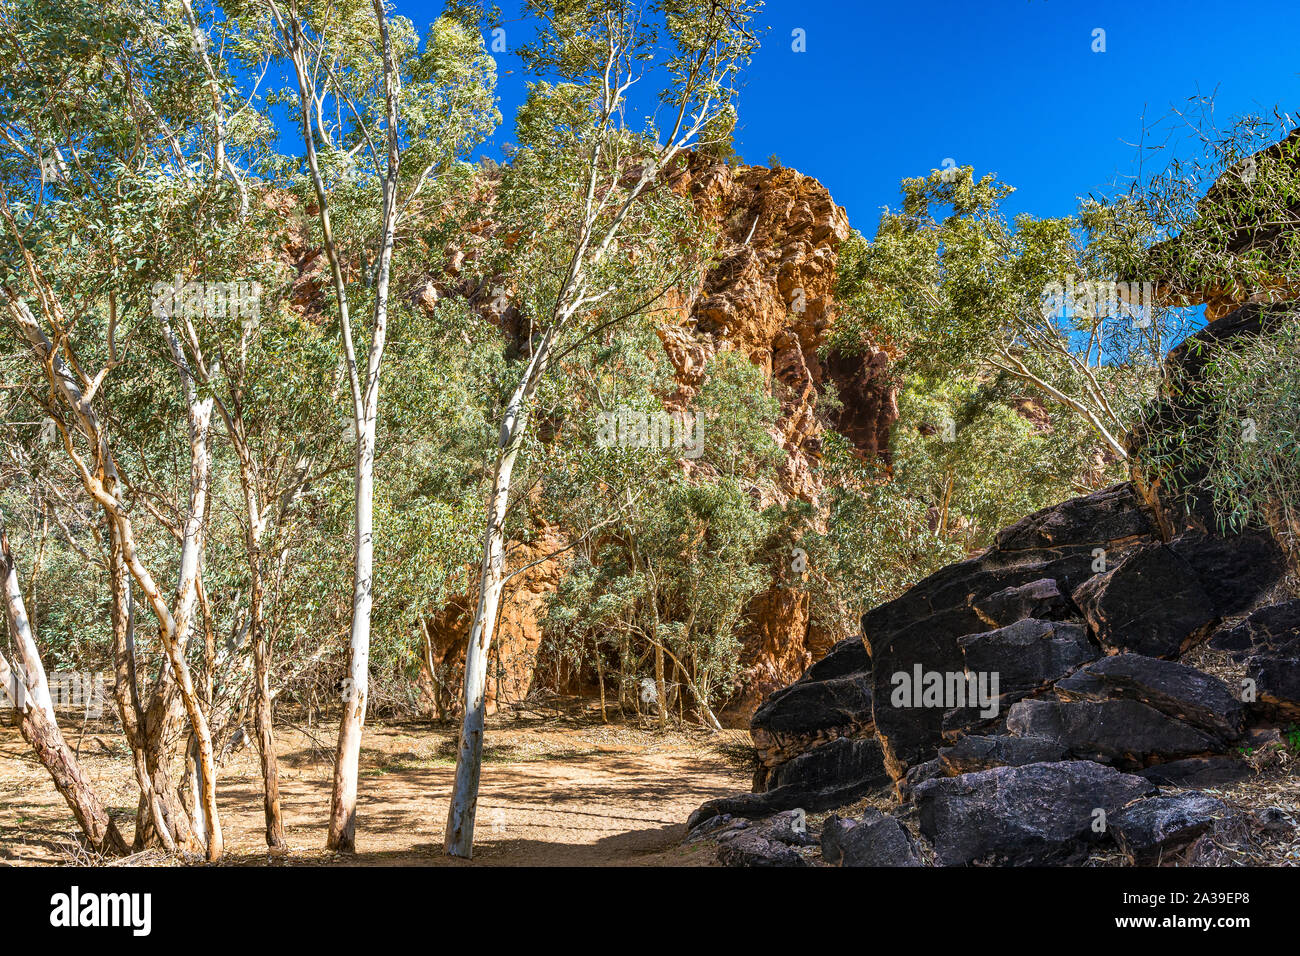 Emily Gap in the East MacDonnell Ranges, Northern Territory, Australia Stock Photo